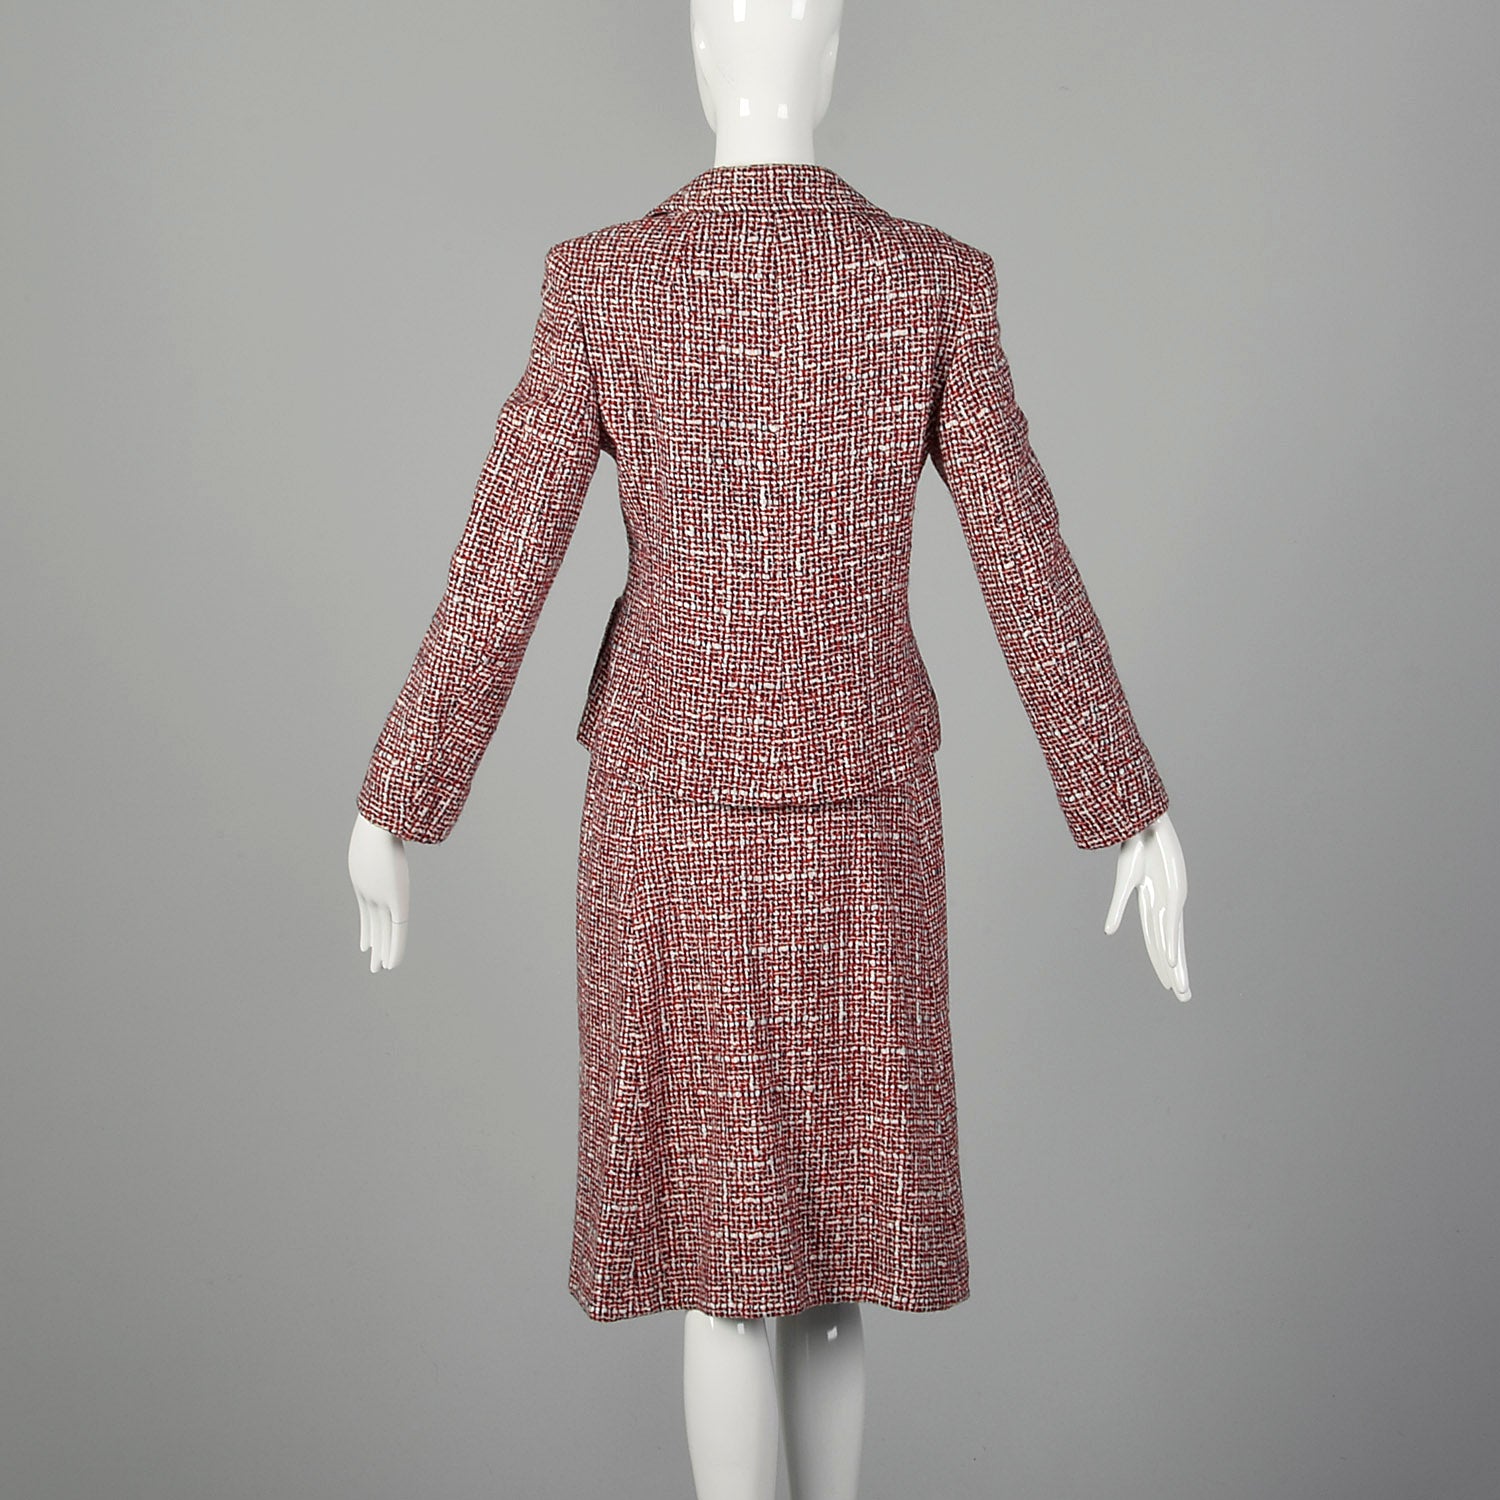 Small 1970s Red White and Blue Tweed Wool Skirt Suit